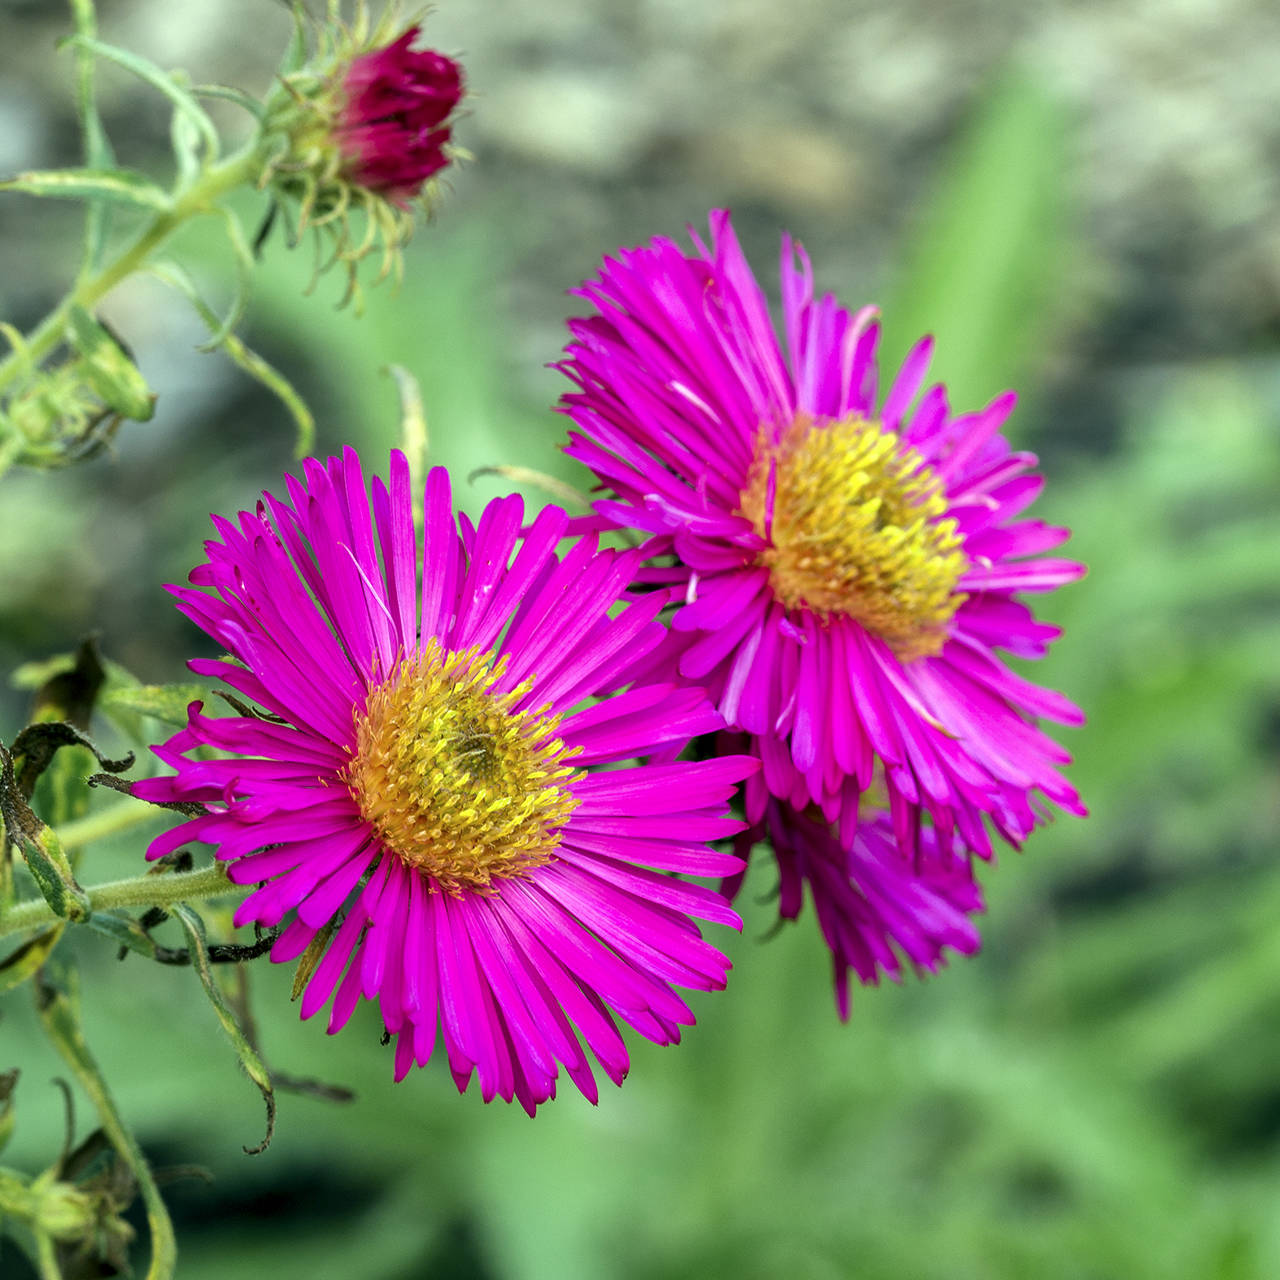 Agnes Monkelbaan photo                                Harrington’s Pink is one brightly colored variety of the New England aster (Symphyotrichum novae-angliae).